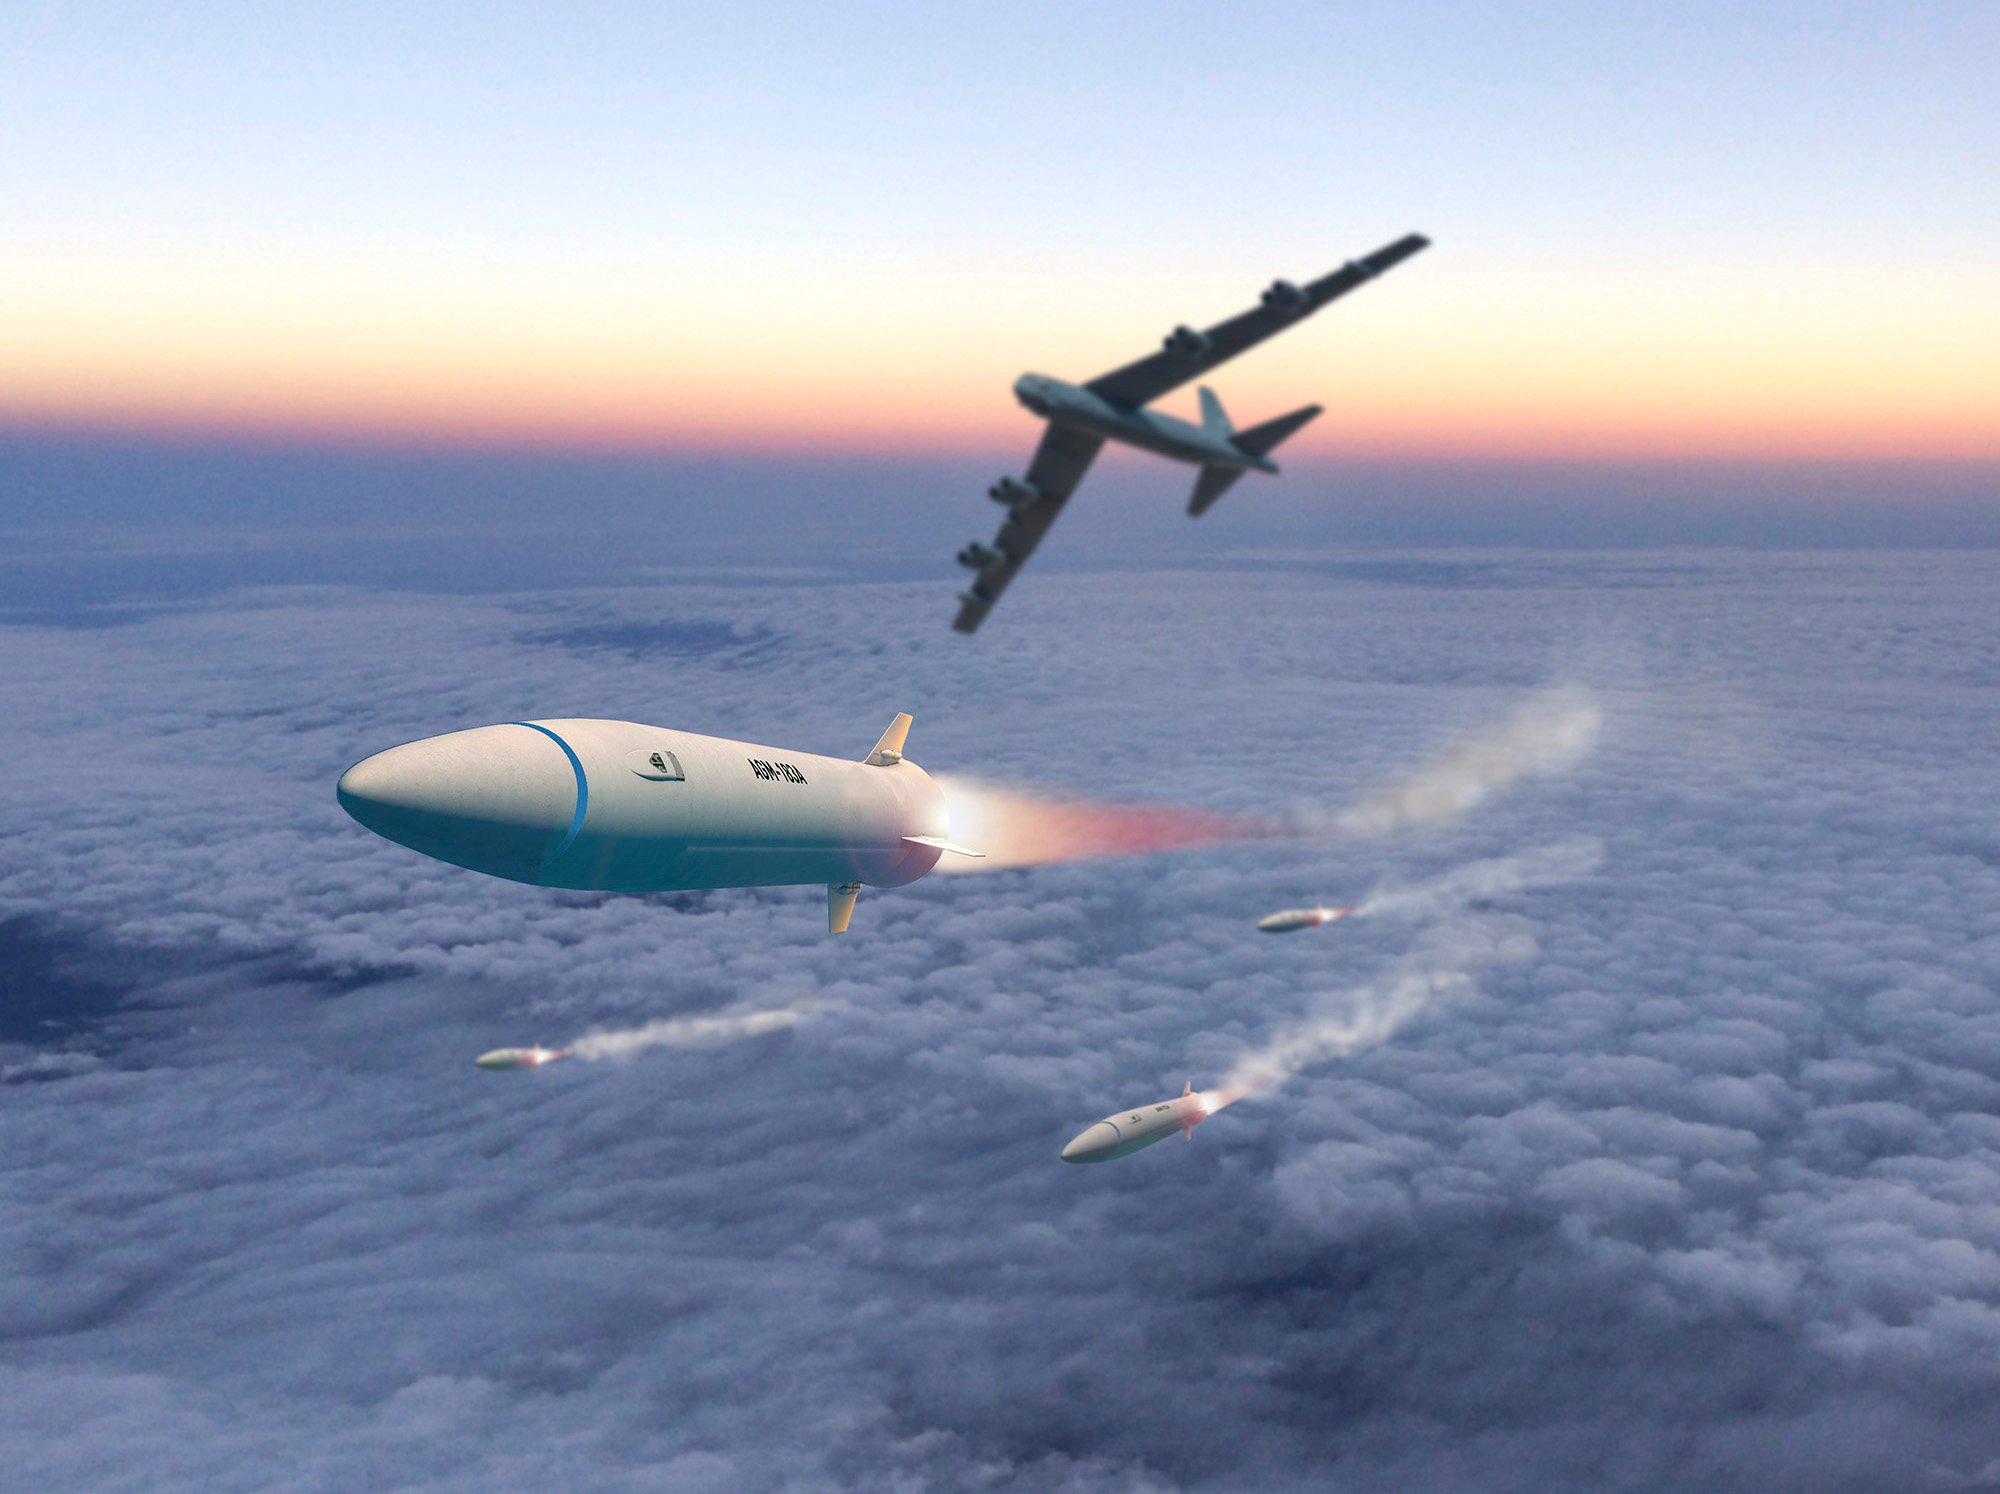 An artist’s impression of a hypersonic weapon being developed by US arms manufacturer Lockheed Martin. Hypersonic weapons are one of the technologies covered under Pillar 2 of the Aukus pact. Photo: Lockheed Martin/US Air Force Handout